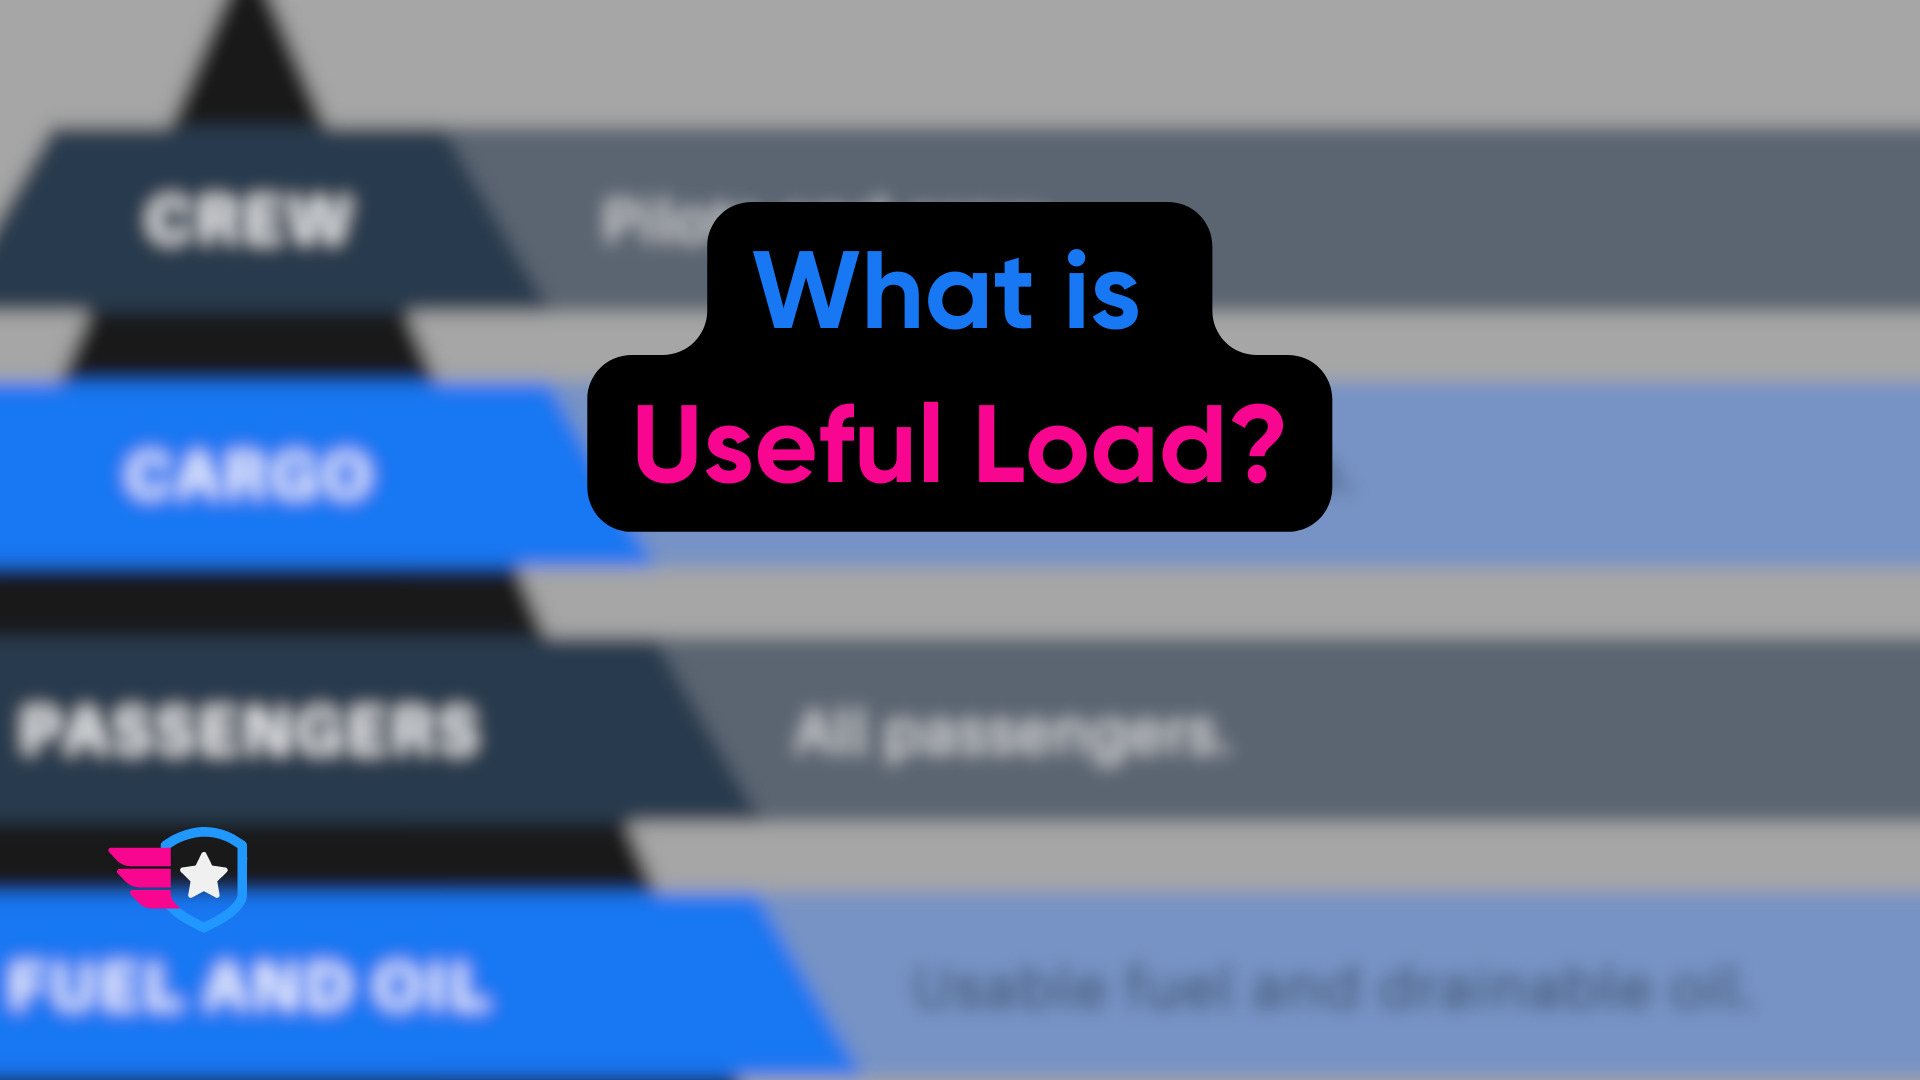 What is Useful Load?